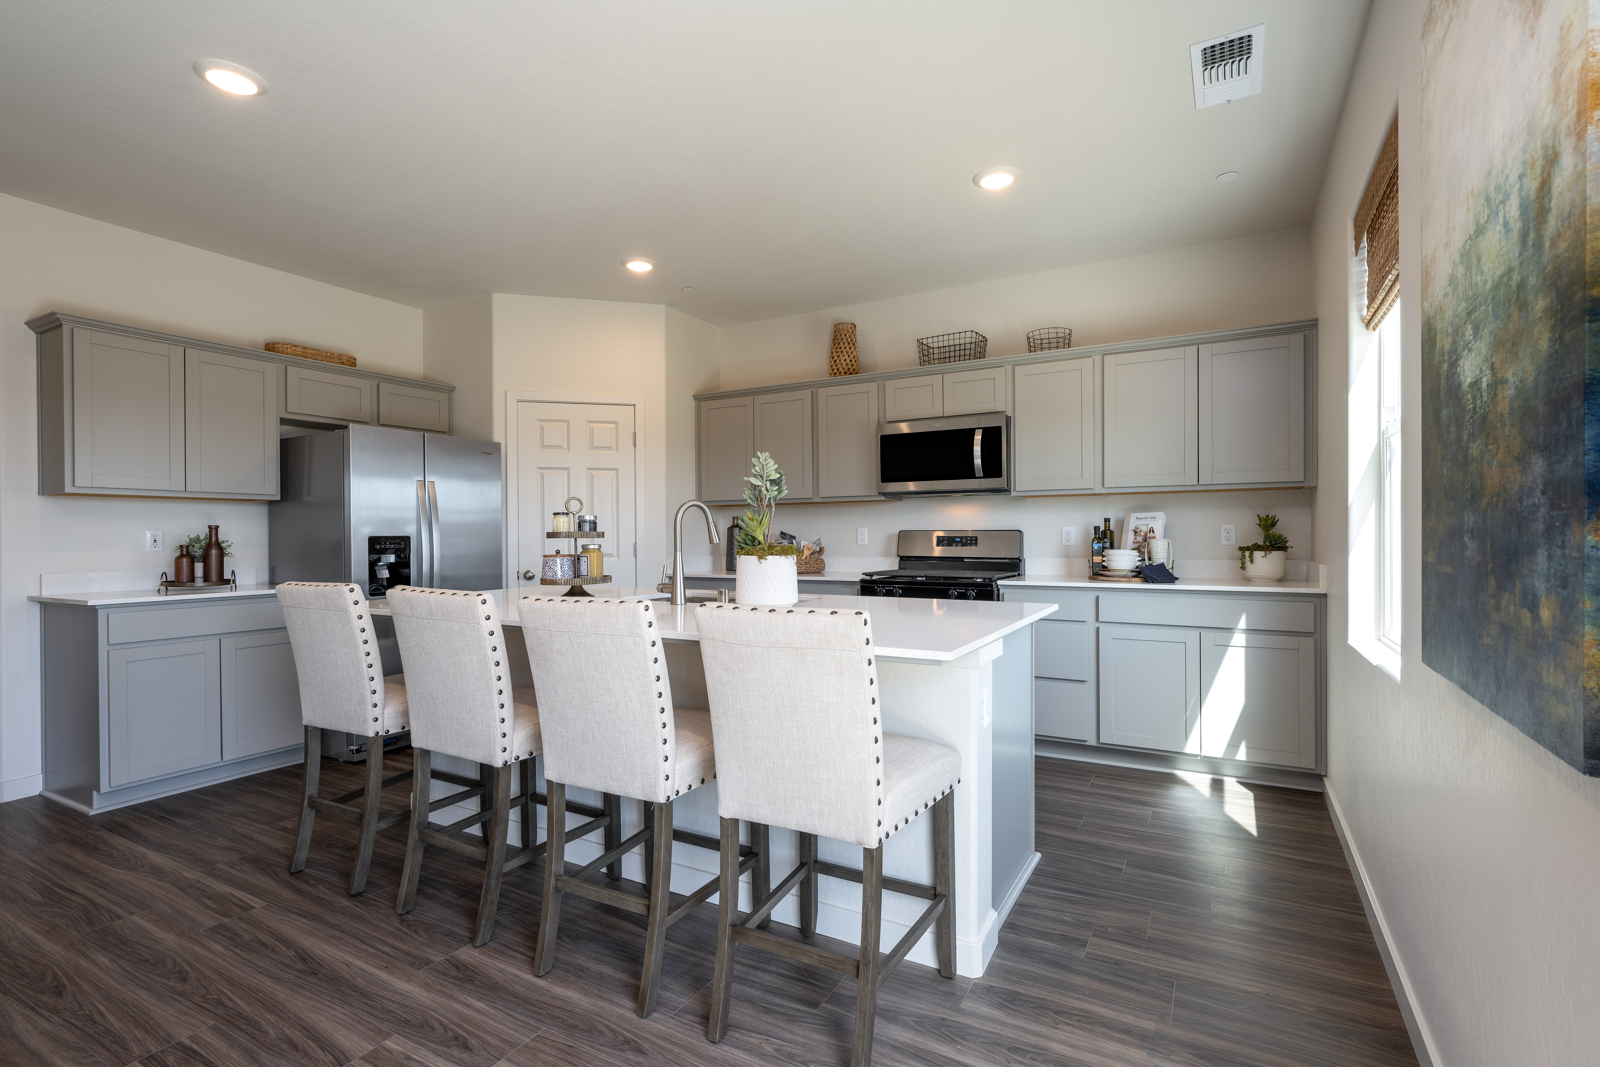 Model home at Liberty Hill in Tulare, CA